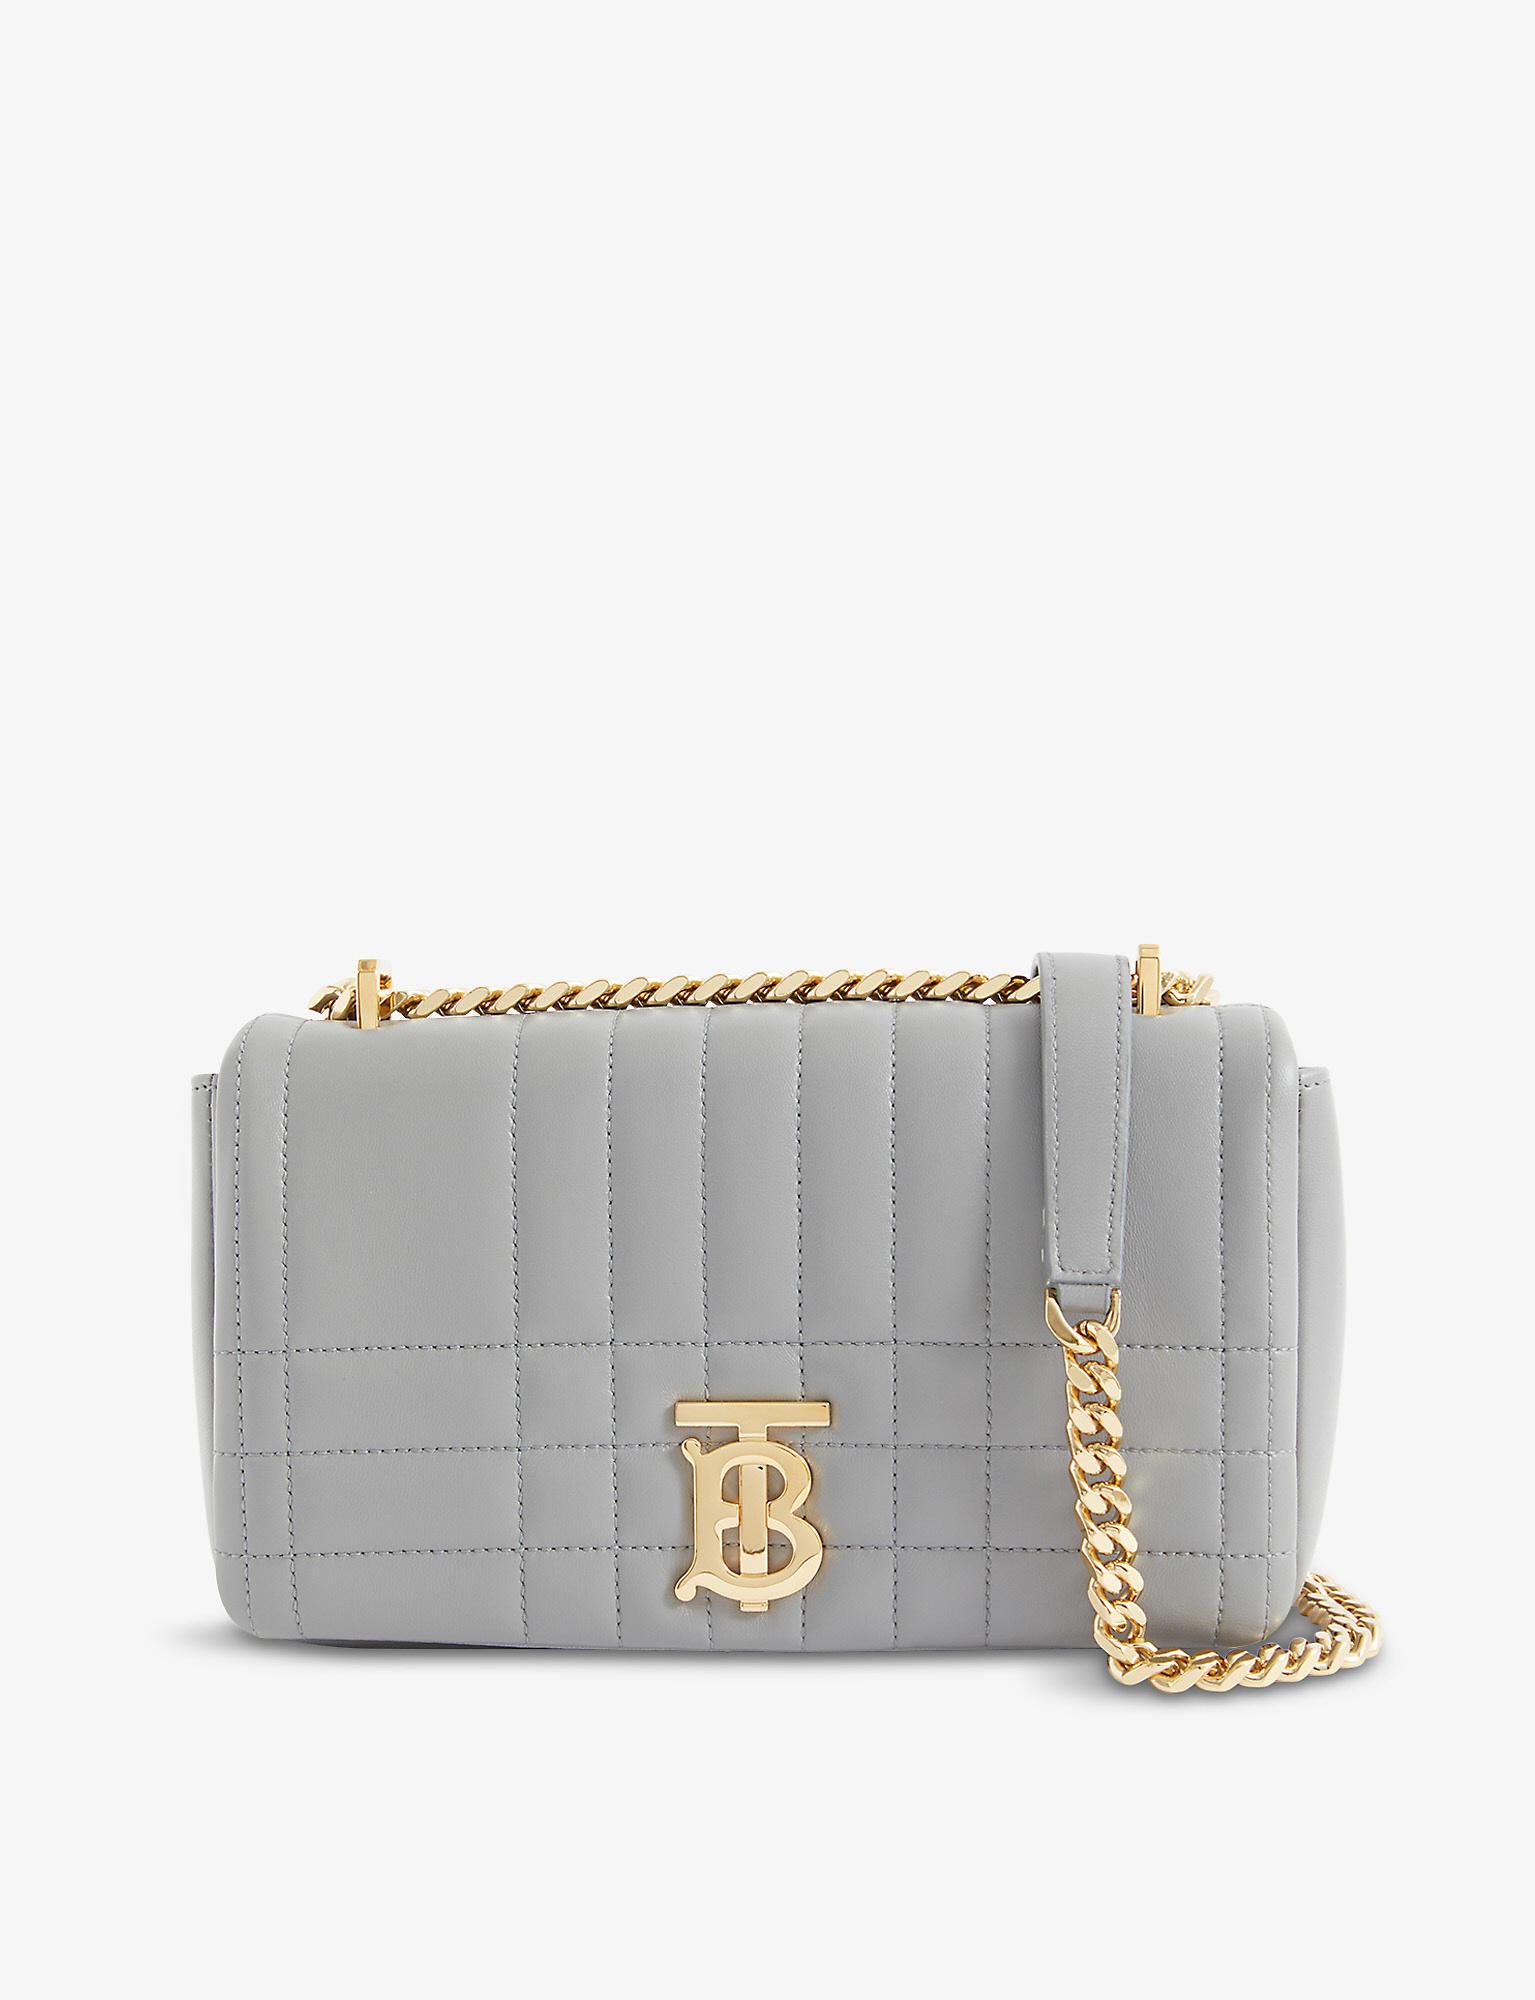 Burberry Lola Small Padded Leather Shoulder Bag in Gray | Lyst